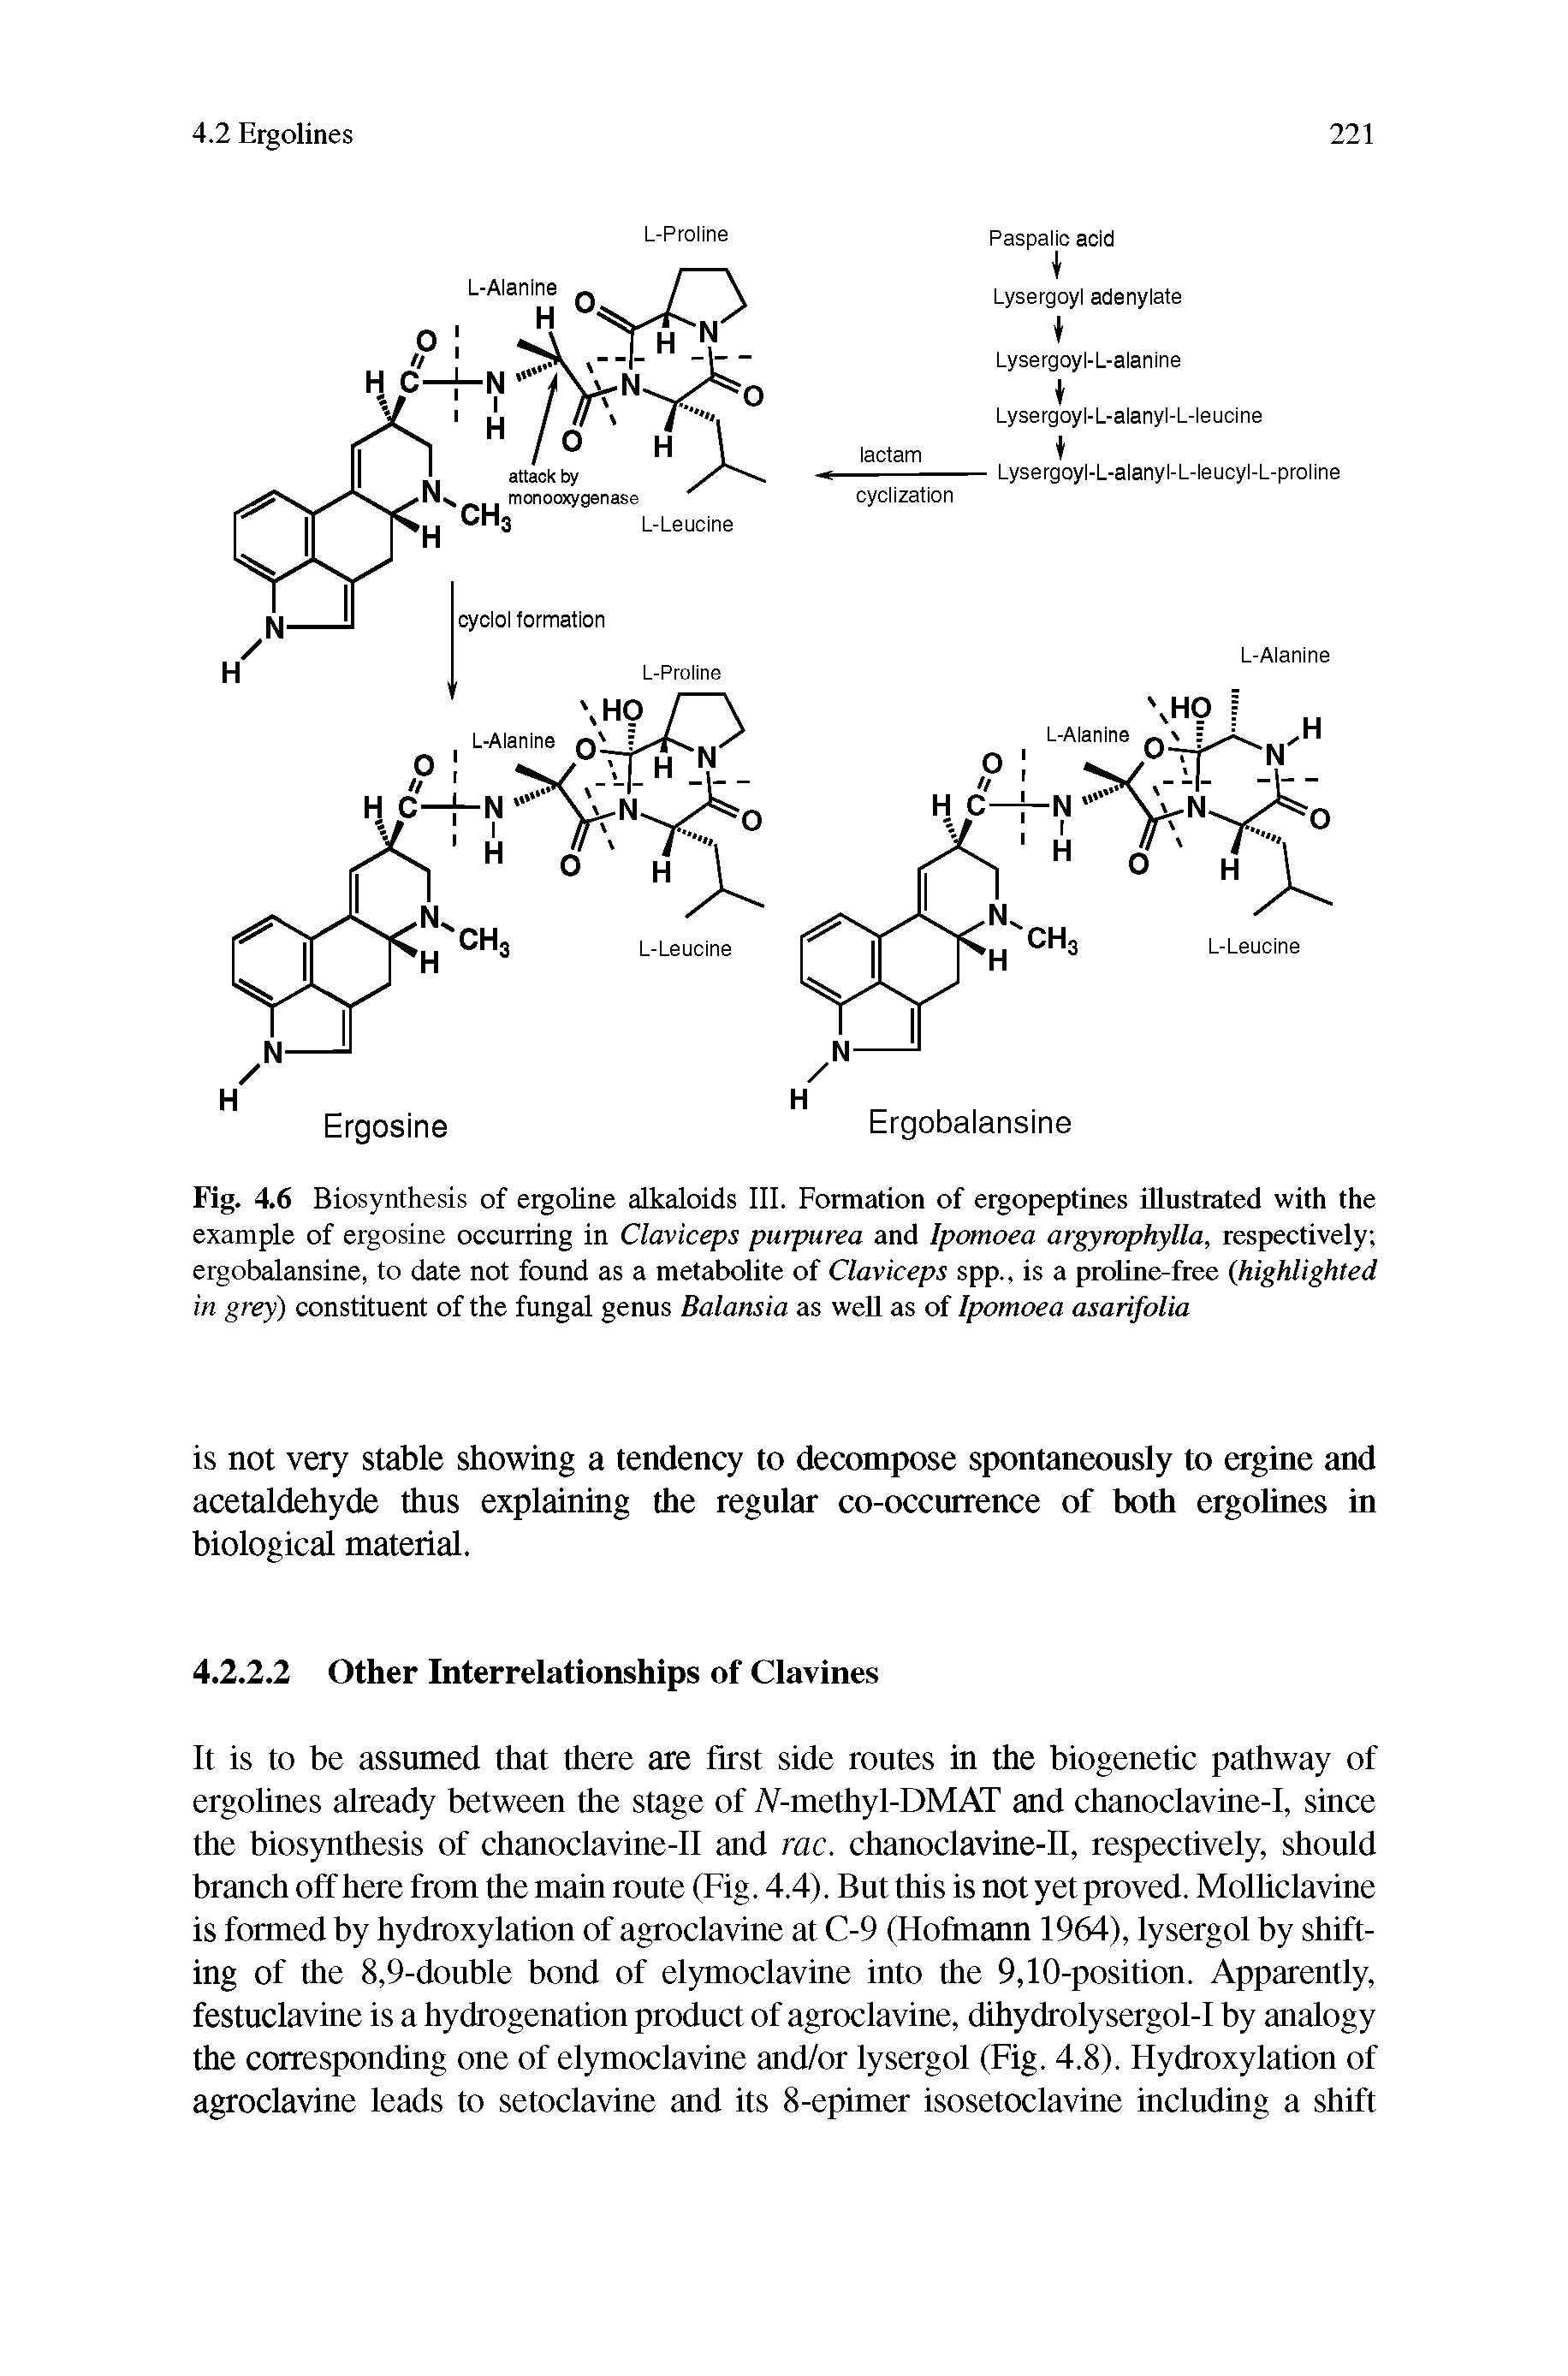 Fig. 4.6 Biosynthesis of ergoline alkaloids III. Formation of eigopeptines illustrated with the example of ergosine occurring in Claviceps purpurea and Ipomoea argyrophylla, respectively ergobalansine, to date not found as a metabolite of Claviceps spp., is a proline-free (highlighted in grey) constituent of the fungal genus Balansia as well as of Ipomoea asarifolia...